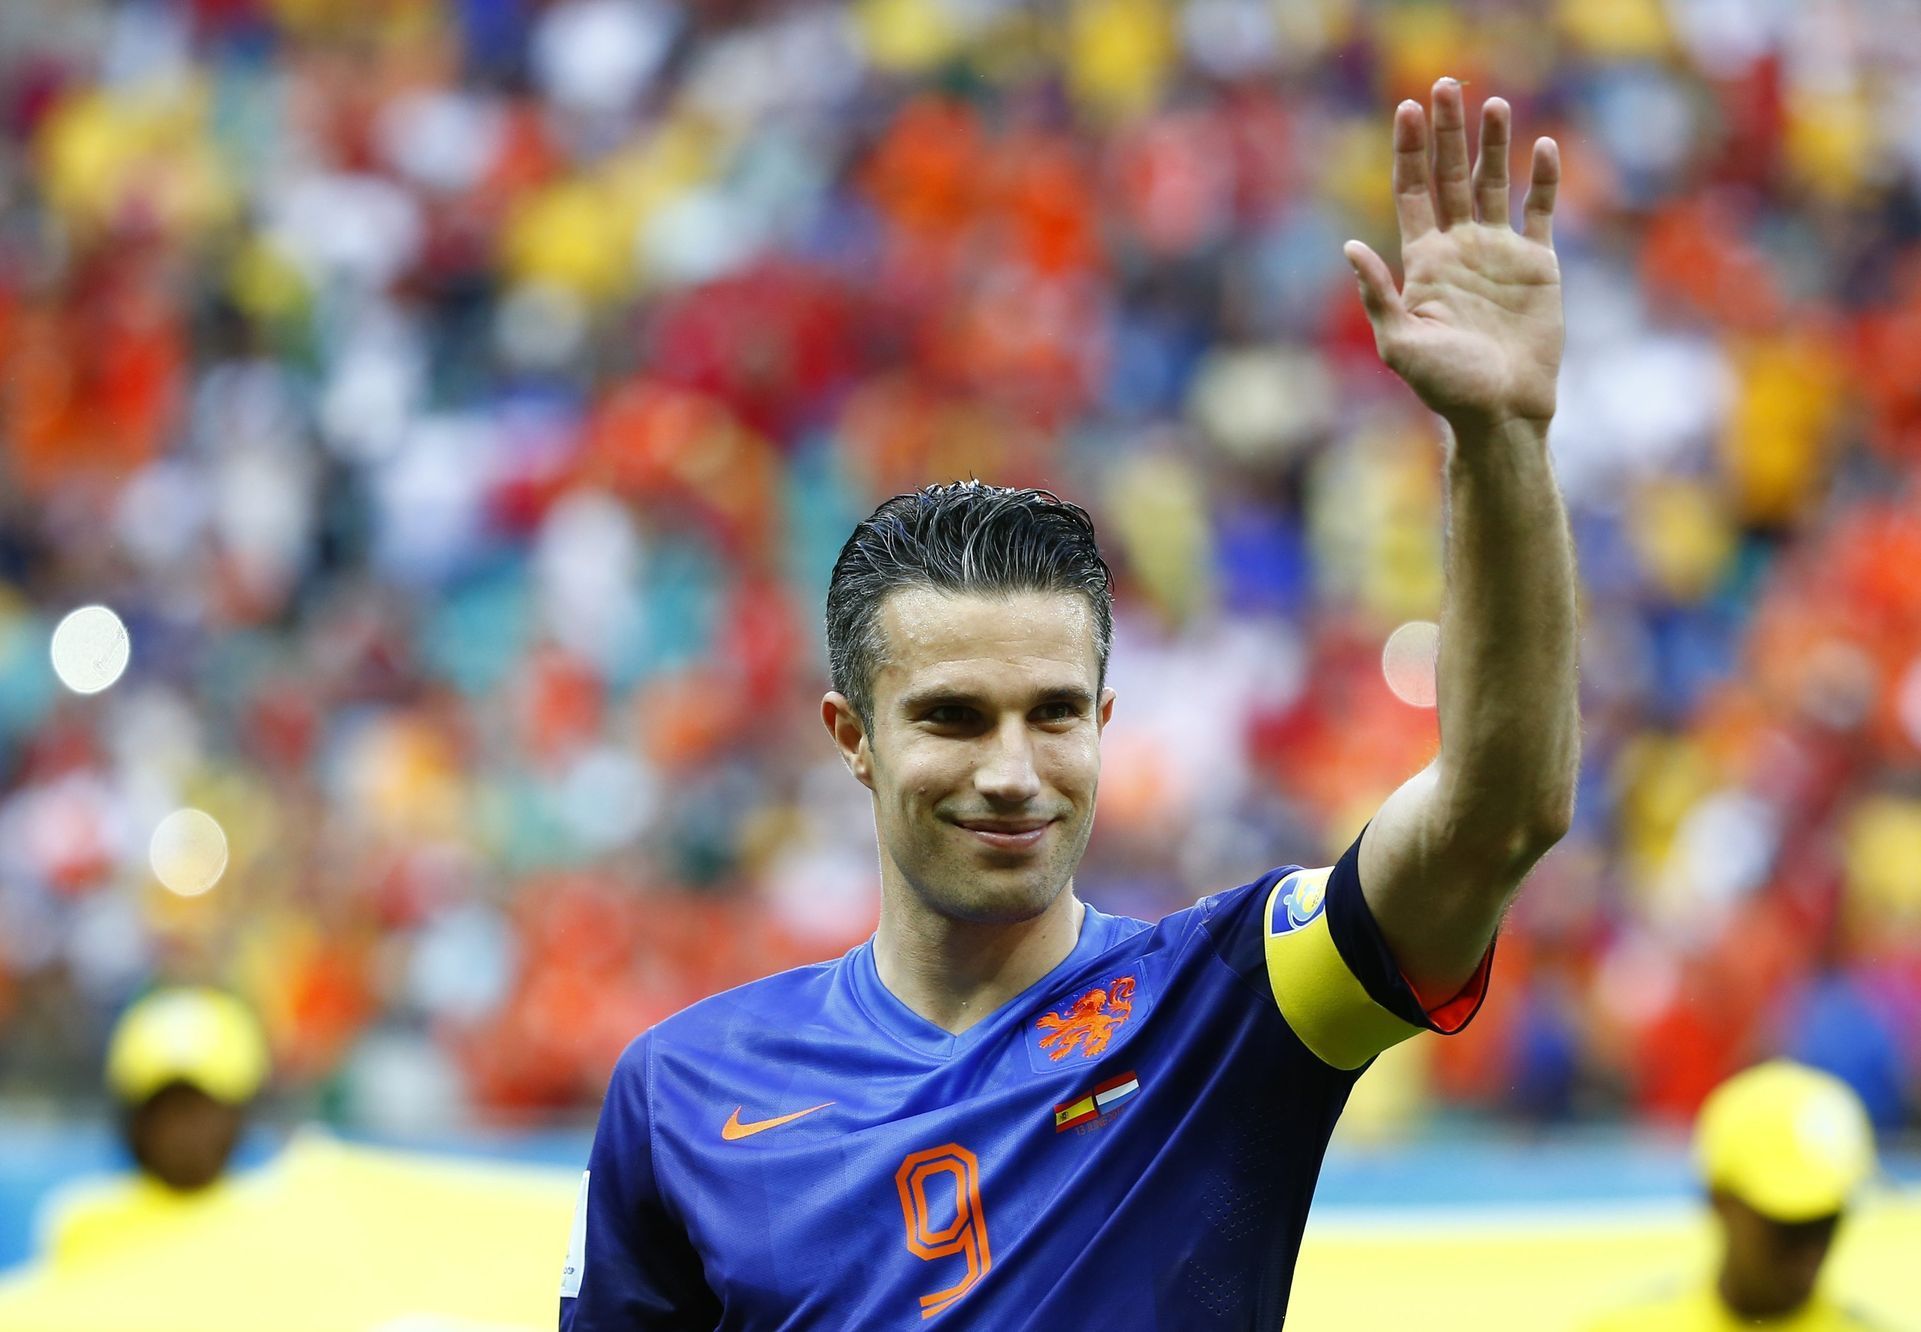 Netherlands  Persie waves at fans during their 2014 World Cup Group B soccer match against Spain at the Fonte Nova arena in Salvador